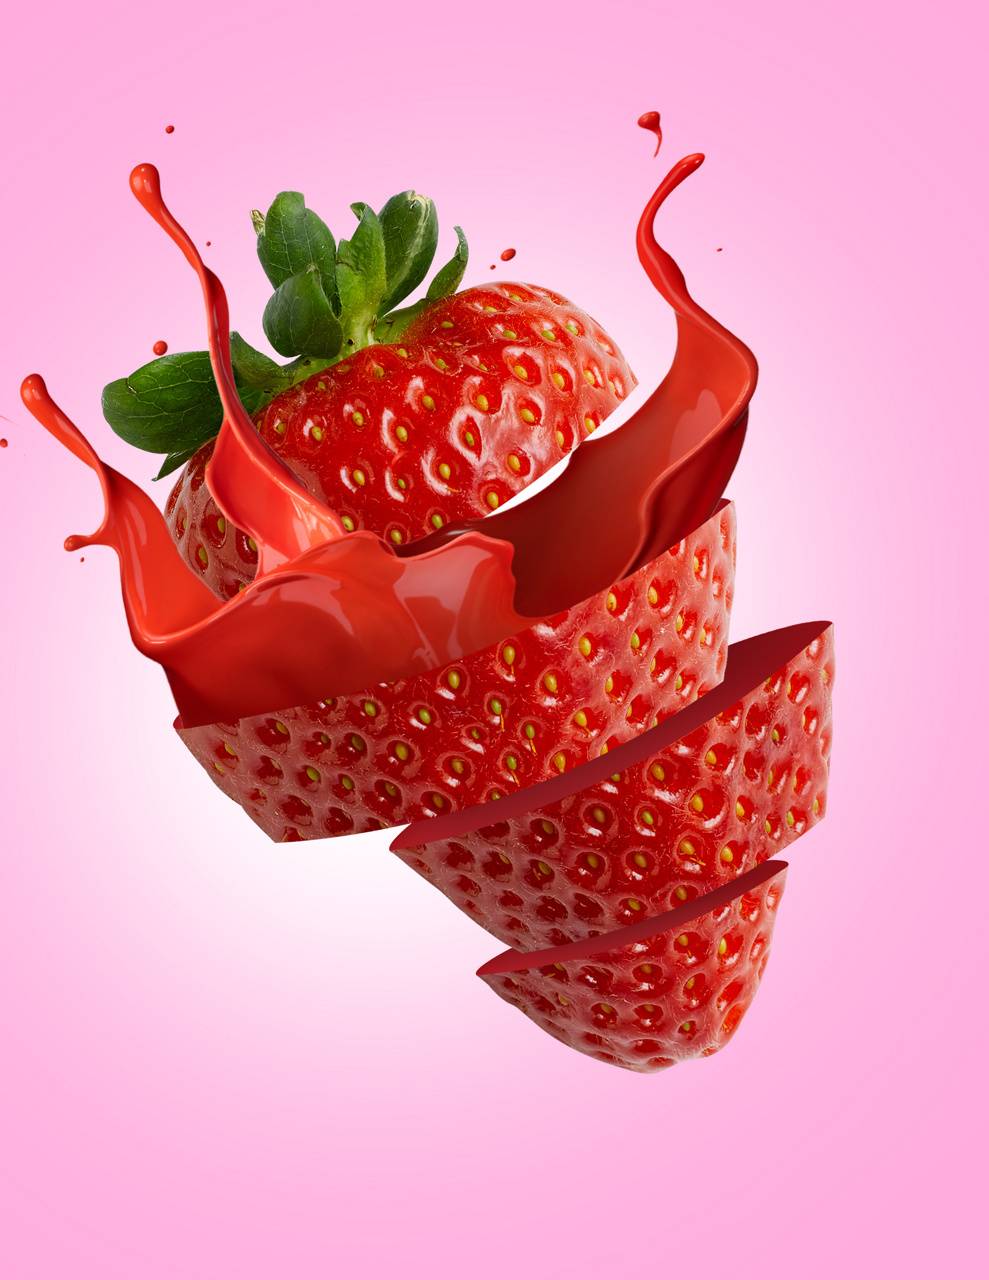 Wallpaper Strawberry Wallpapers